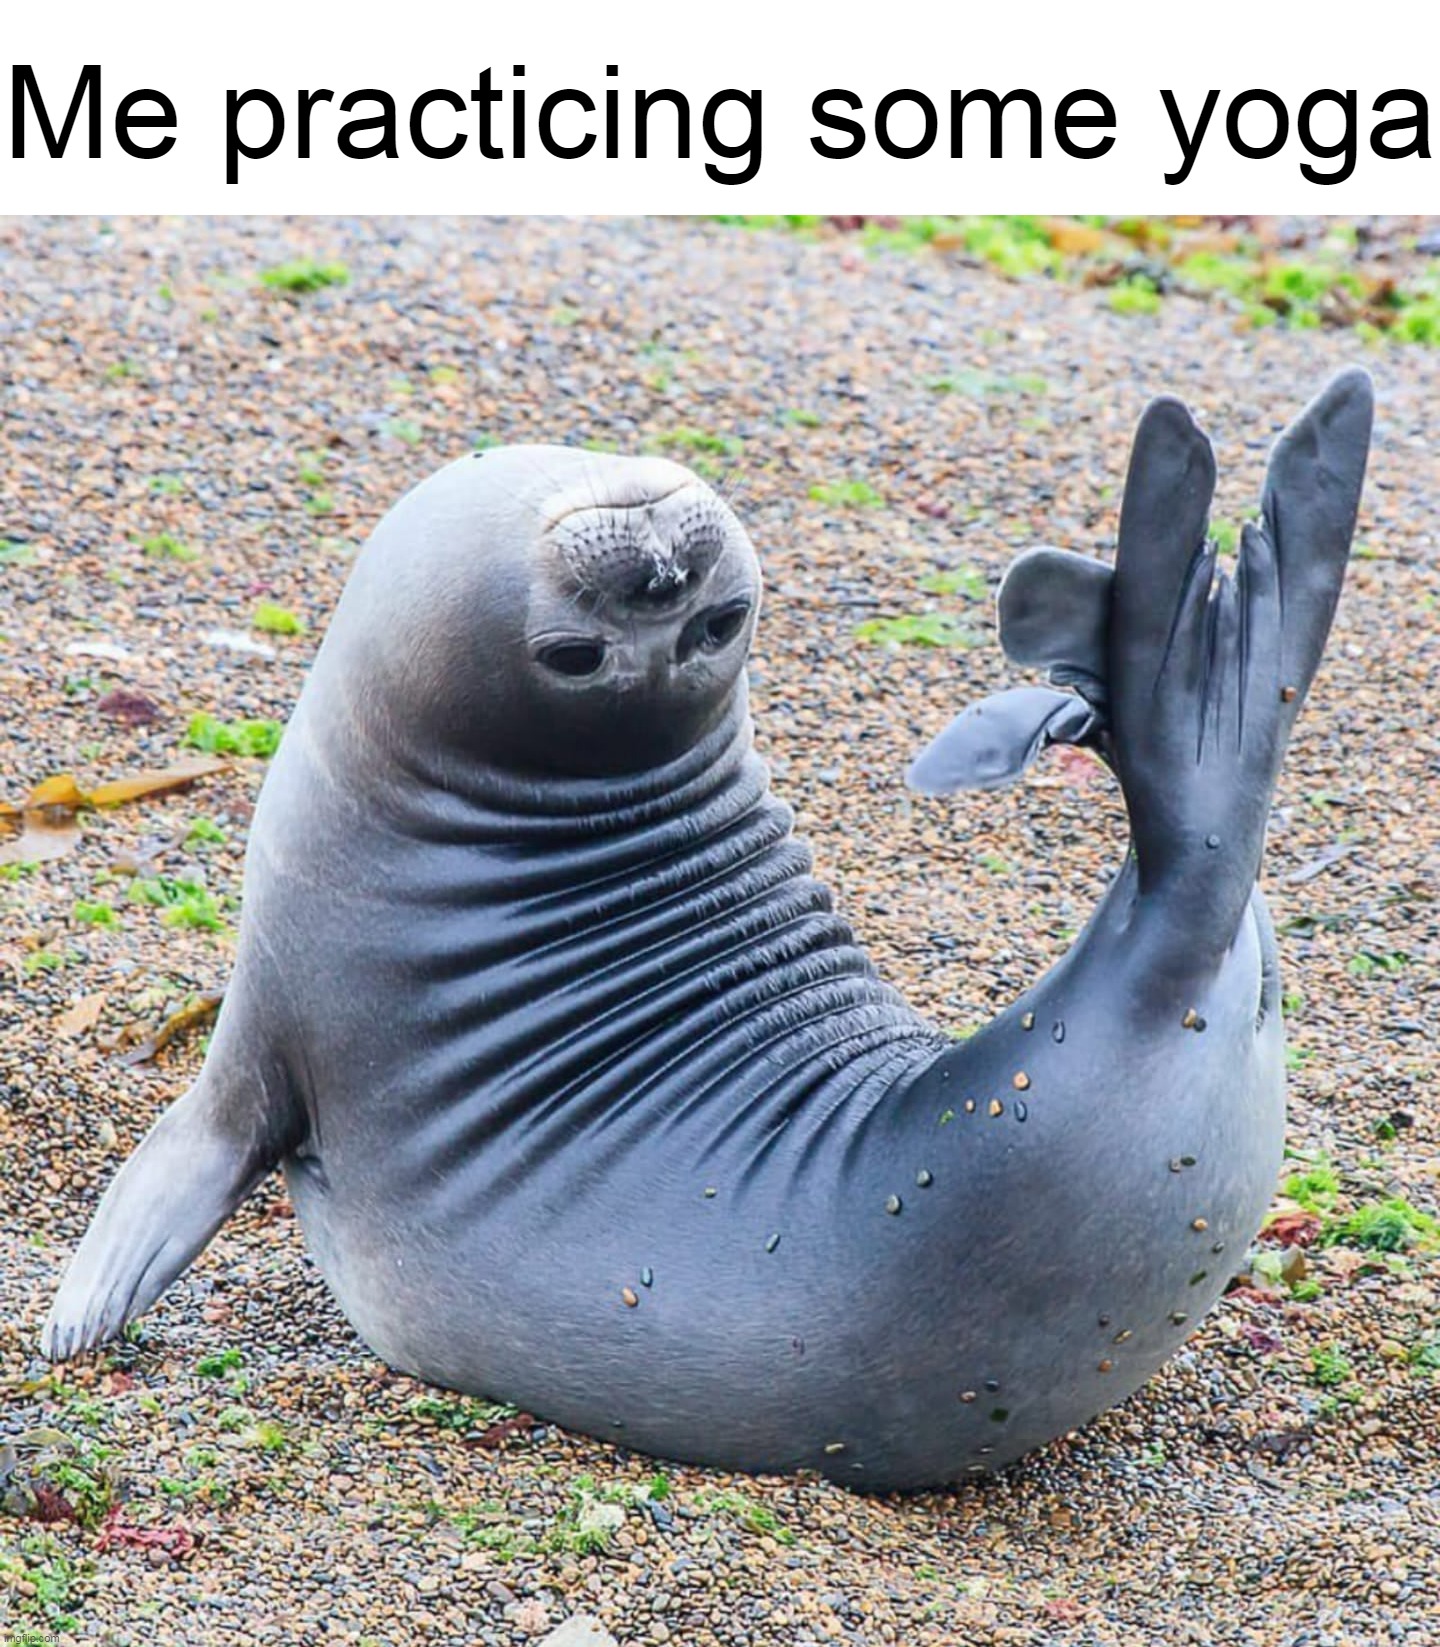  Me practicing some yoga | image tagged in meme,memes,humor | made w/ Imgflip meme maker